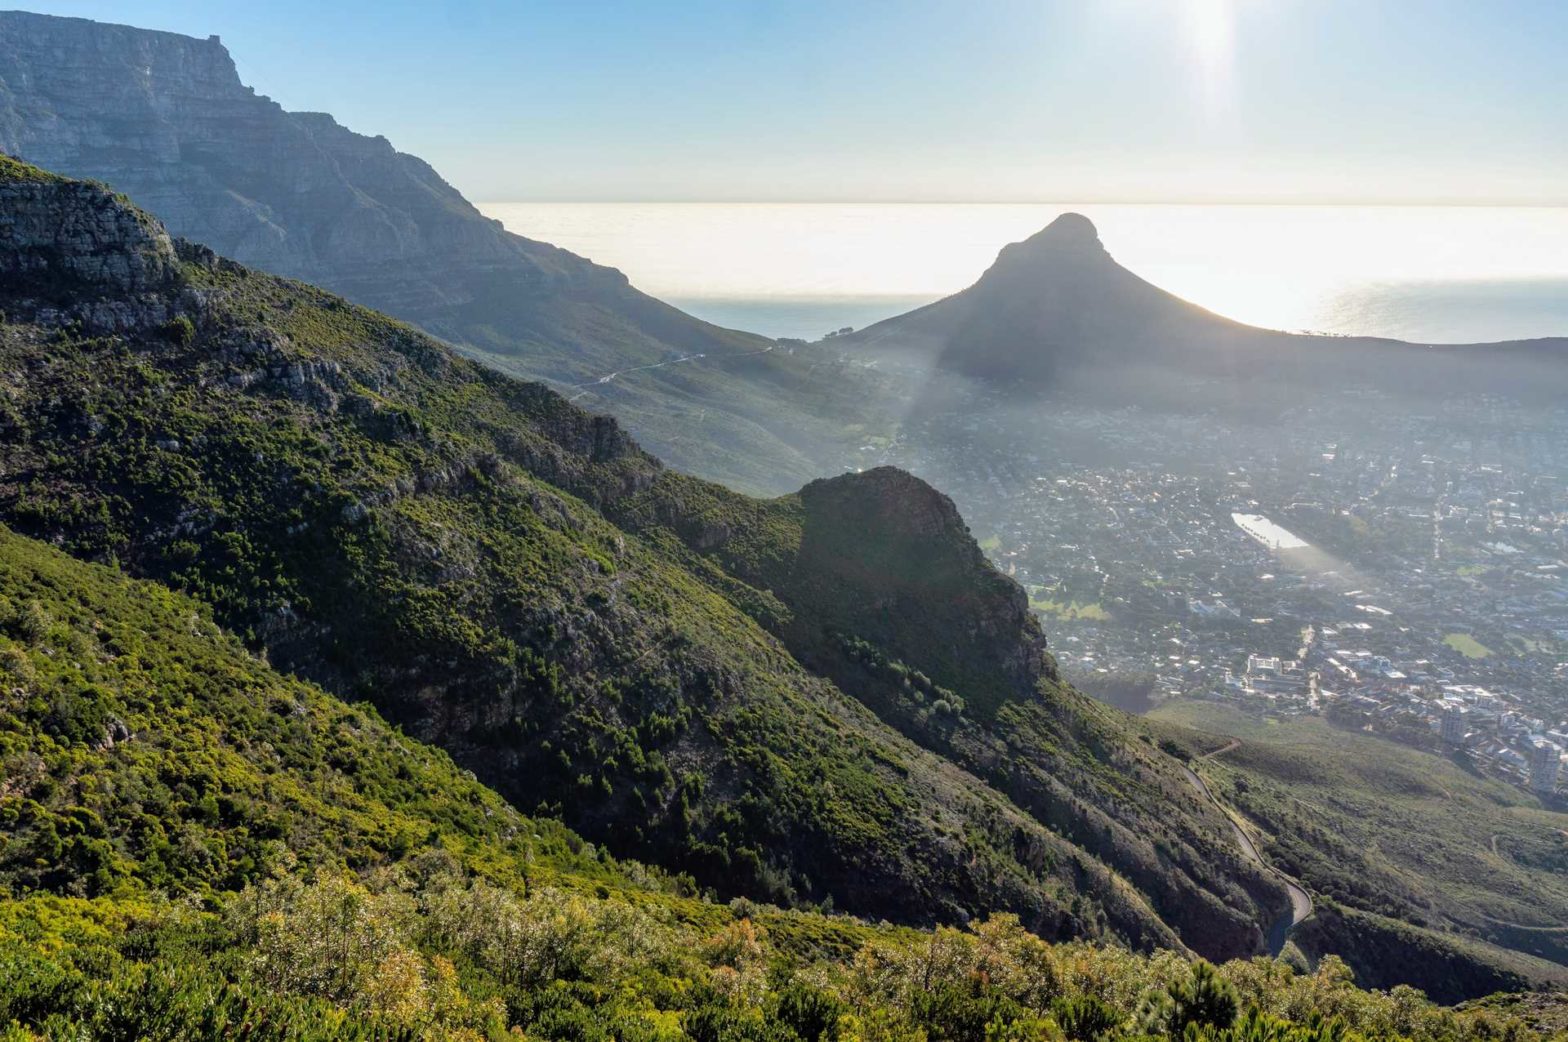 View from the slopes of Devil's Peak Cape Town.